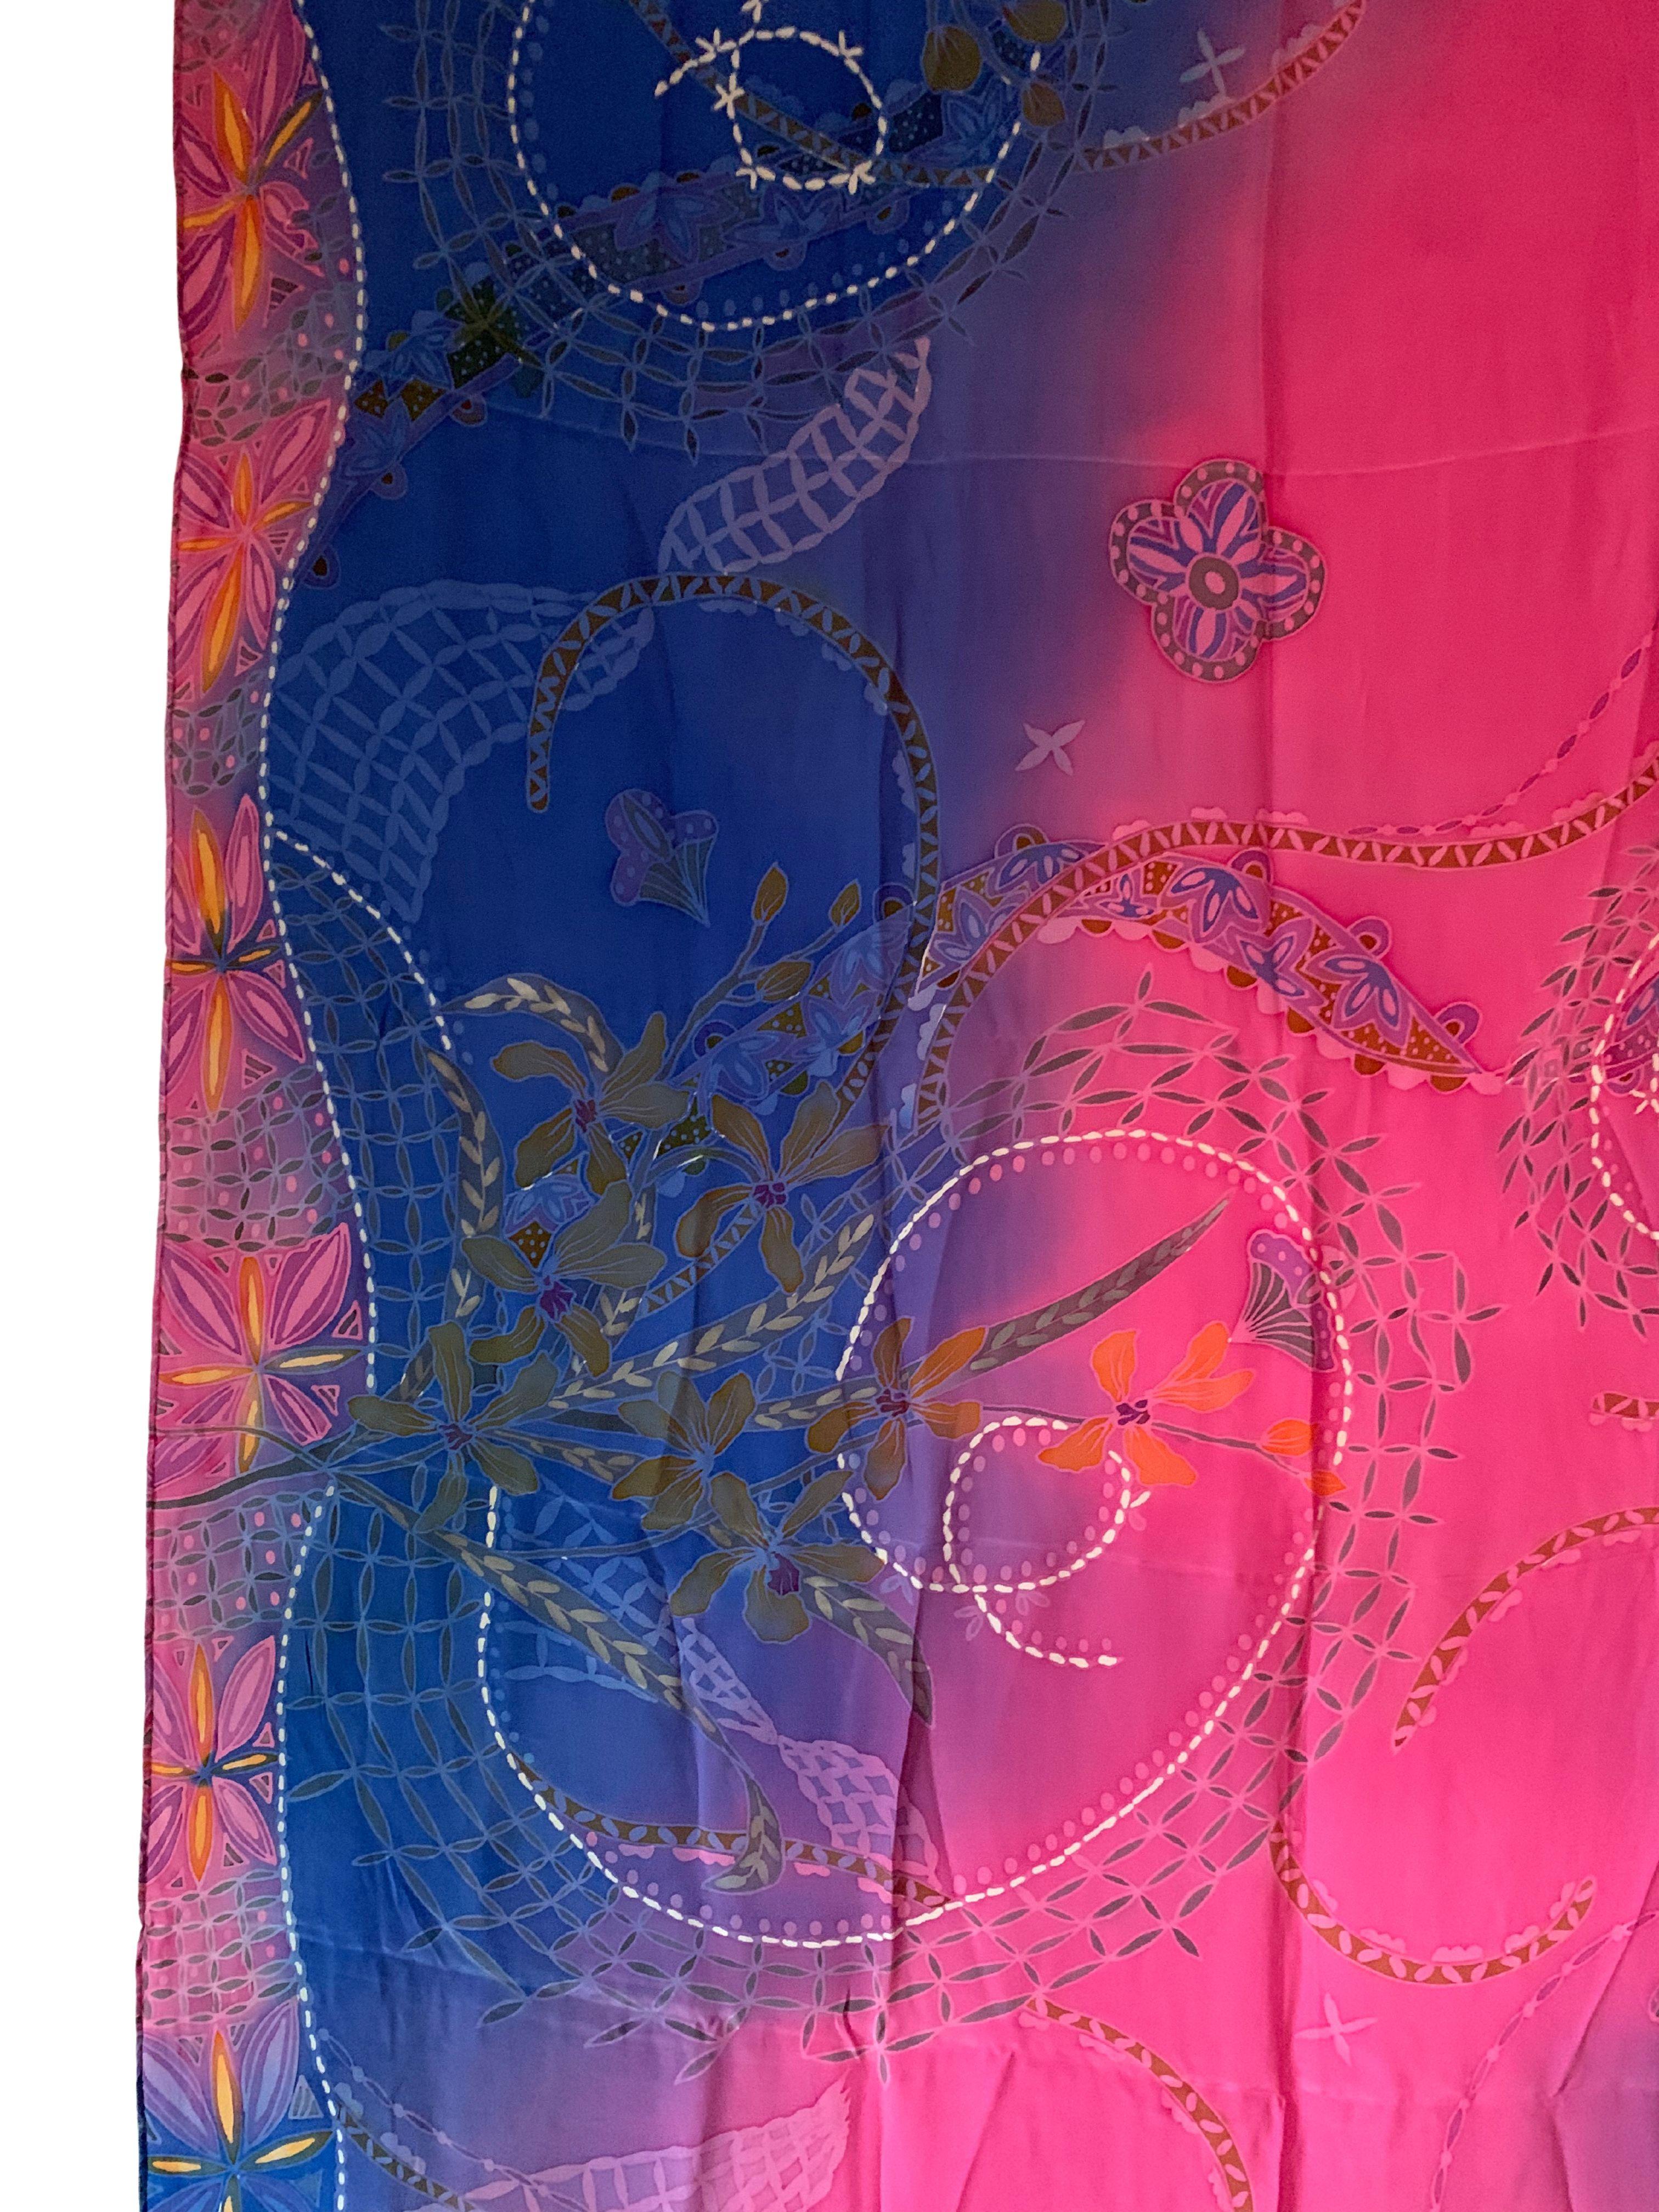 Hand-Crafted Silk Textile with Stunning Detailing For Sale 2